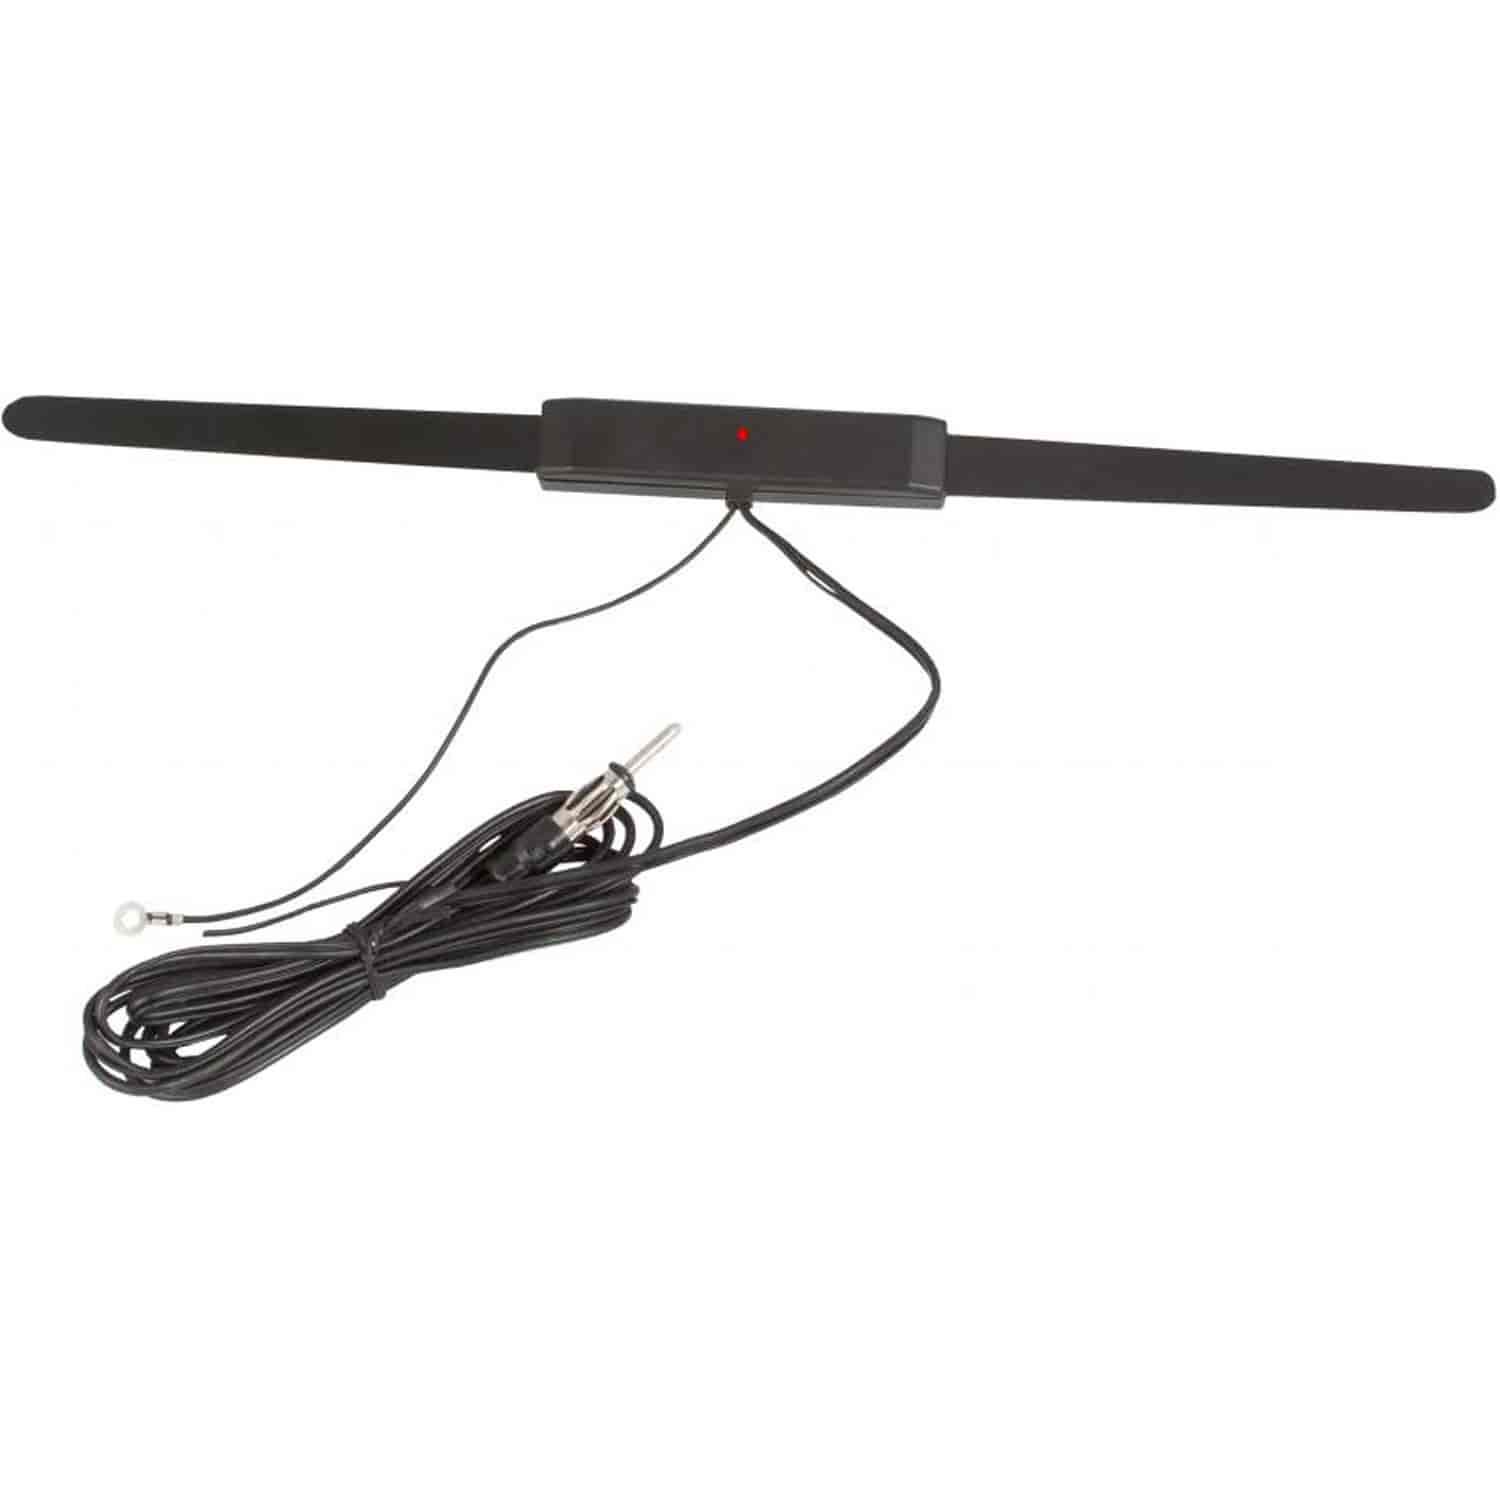 Amplified Window Mount Antenna Includes Power Lead and 105" Antenna Cable